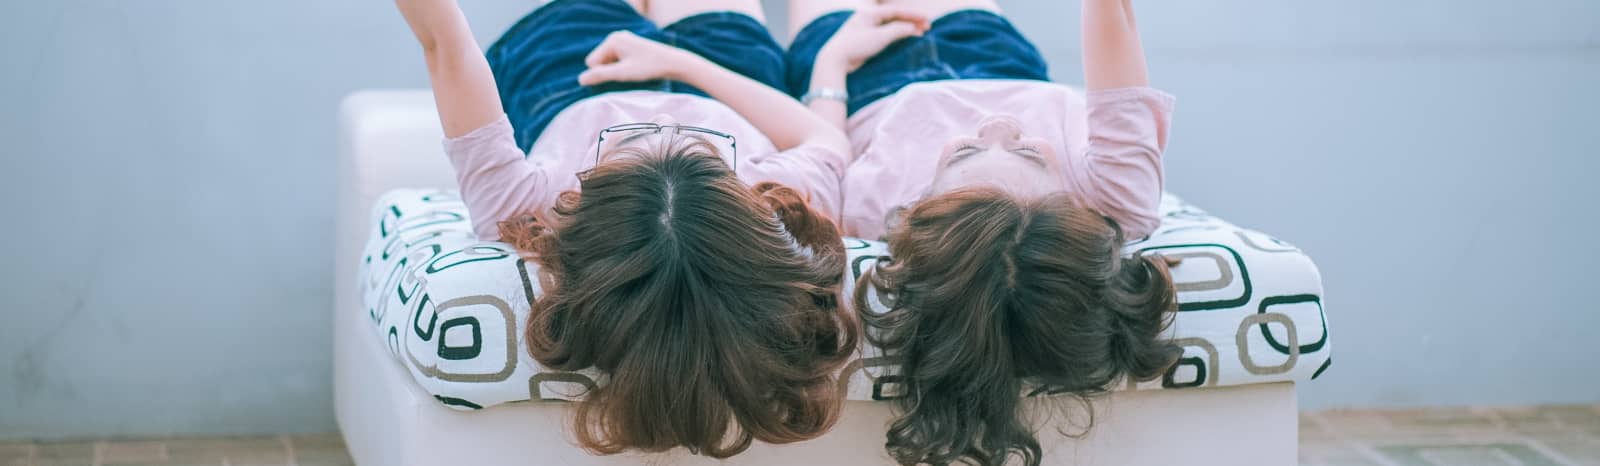  Do Identical Twins Share The Same DNA?